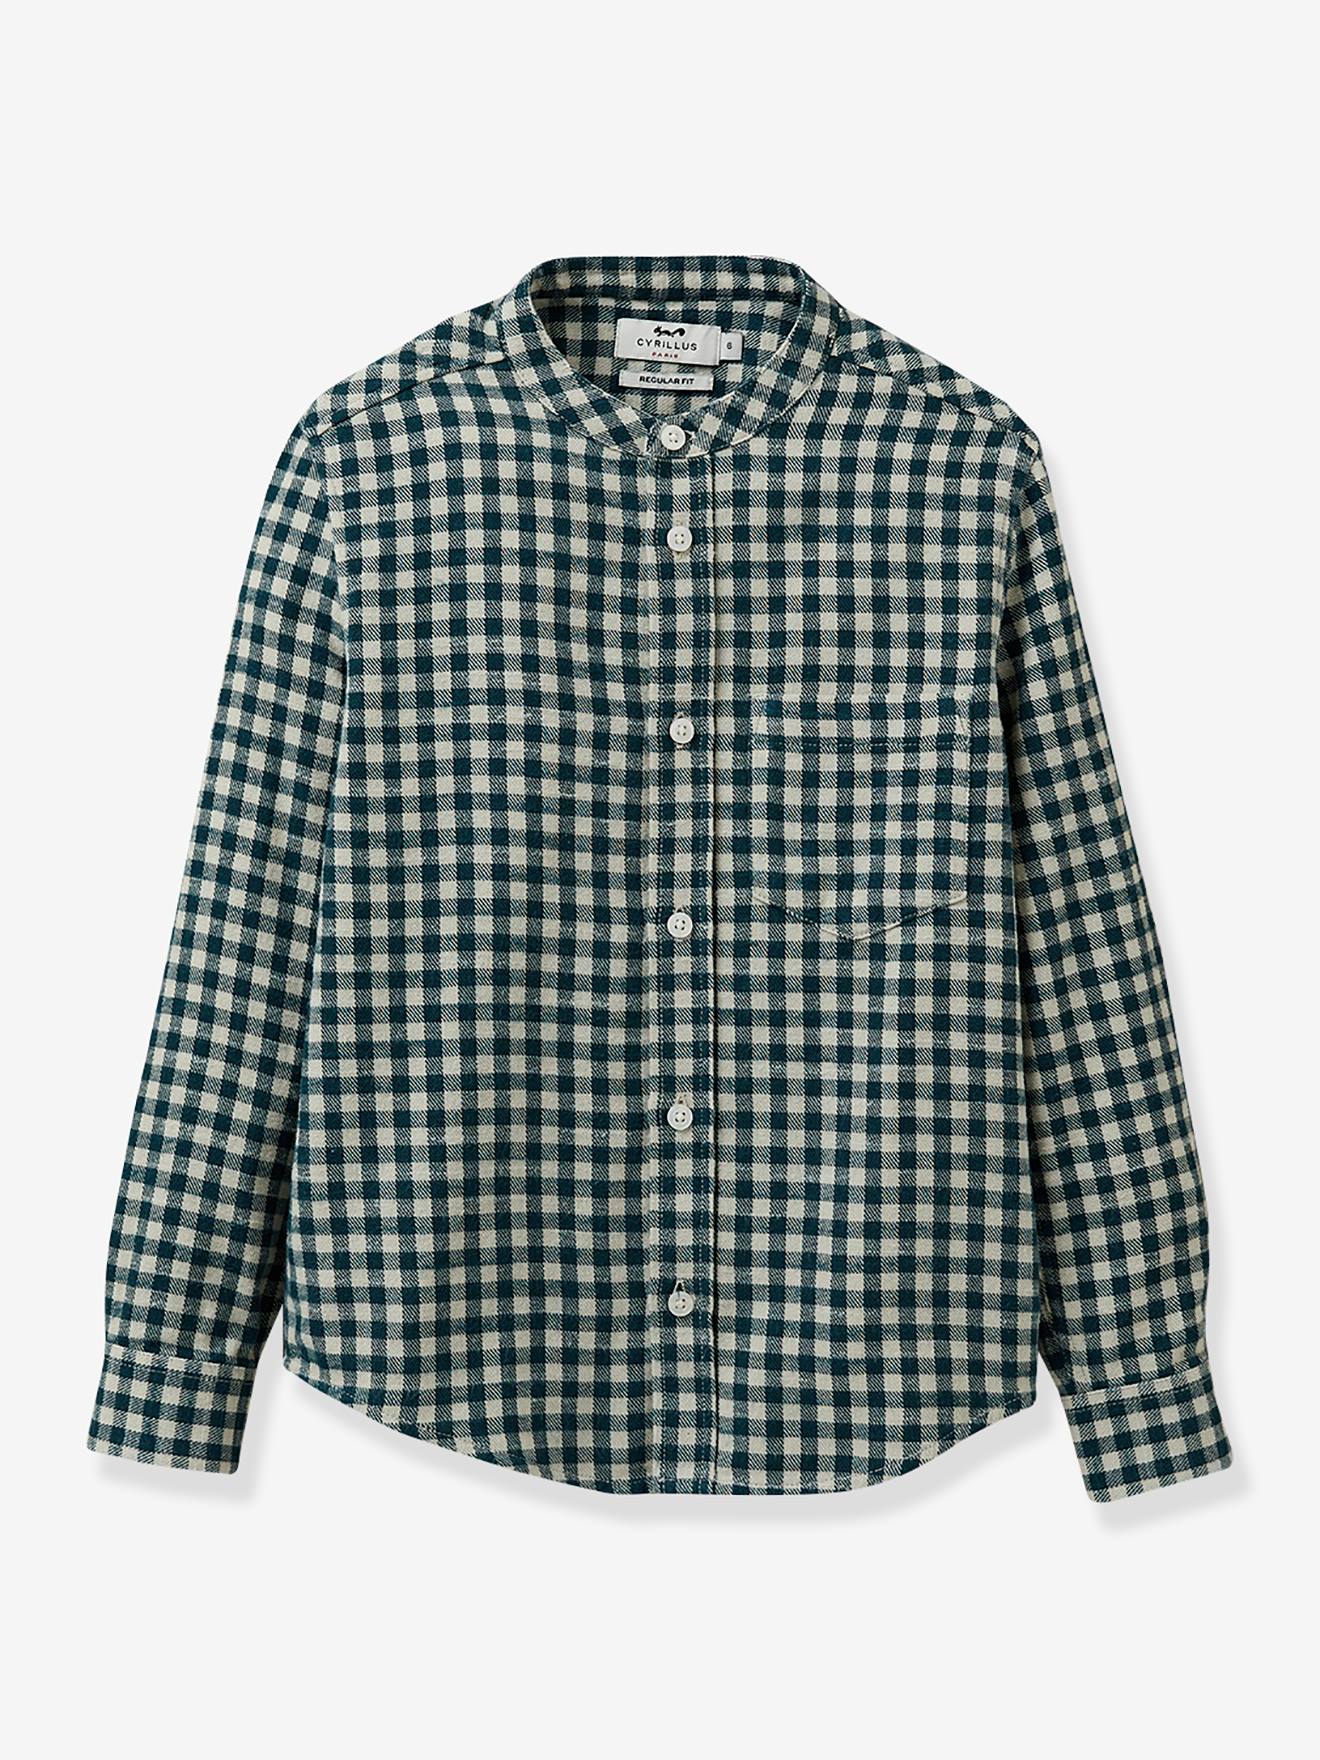 Gingham Shirt with Mandarin Collar for Boys, by Cyrillus chequered green